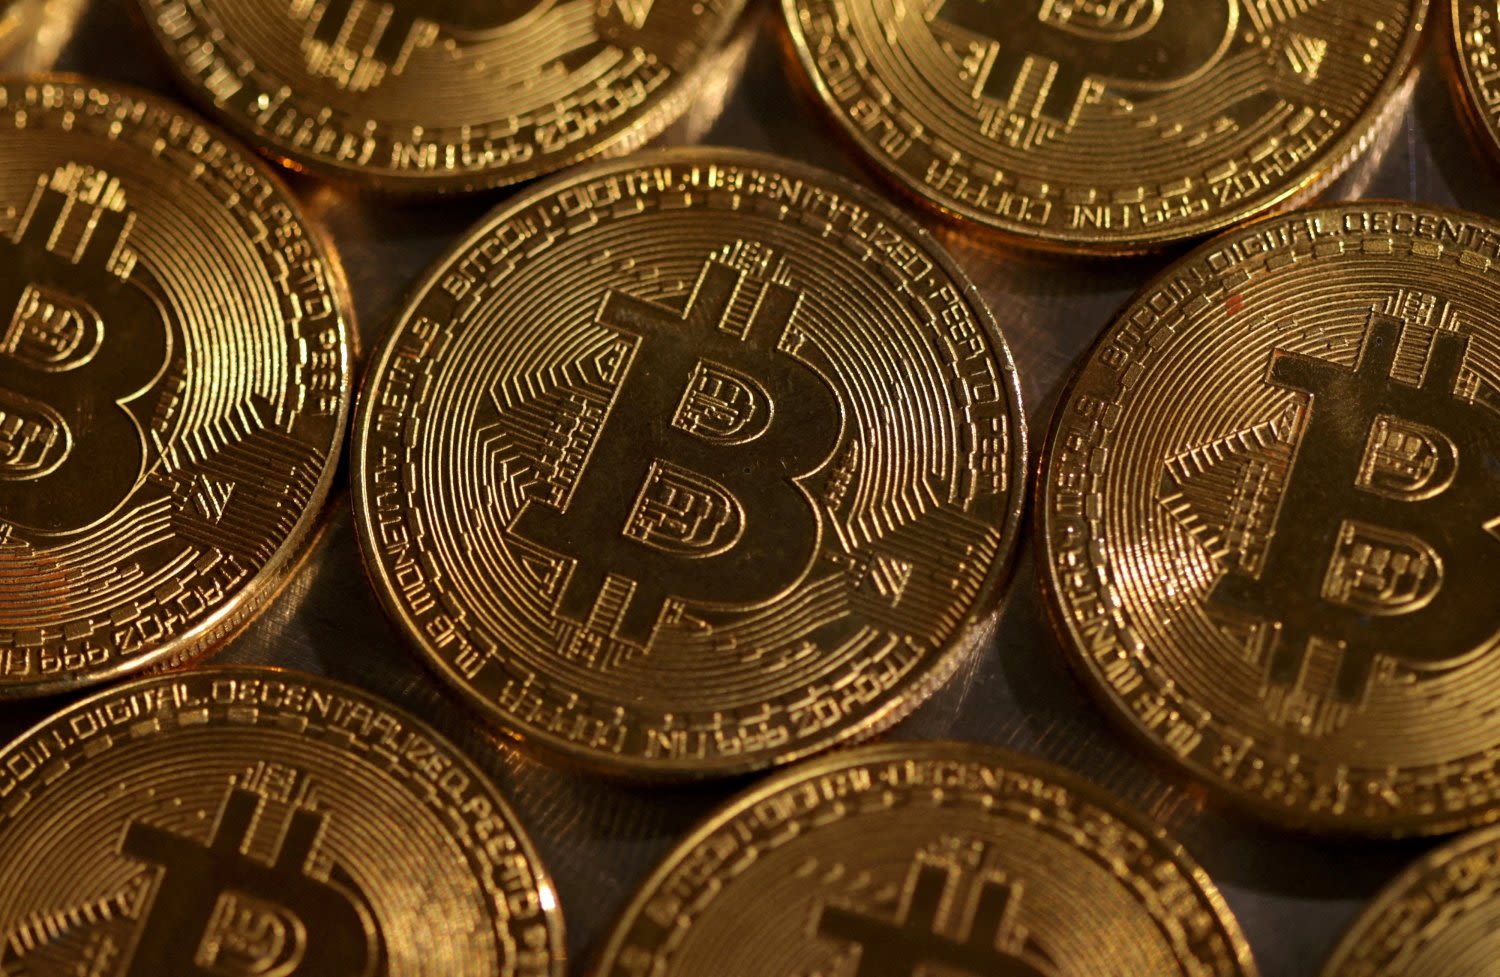 US government moves its $2 billion worth of Bitcoin seized from Silk Road